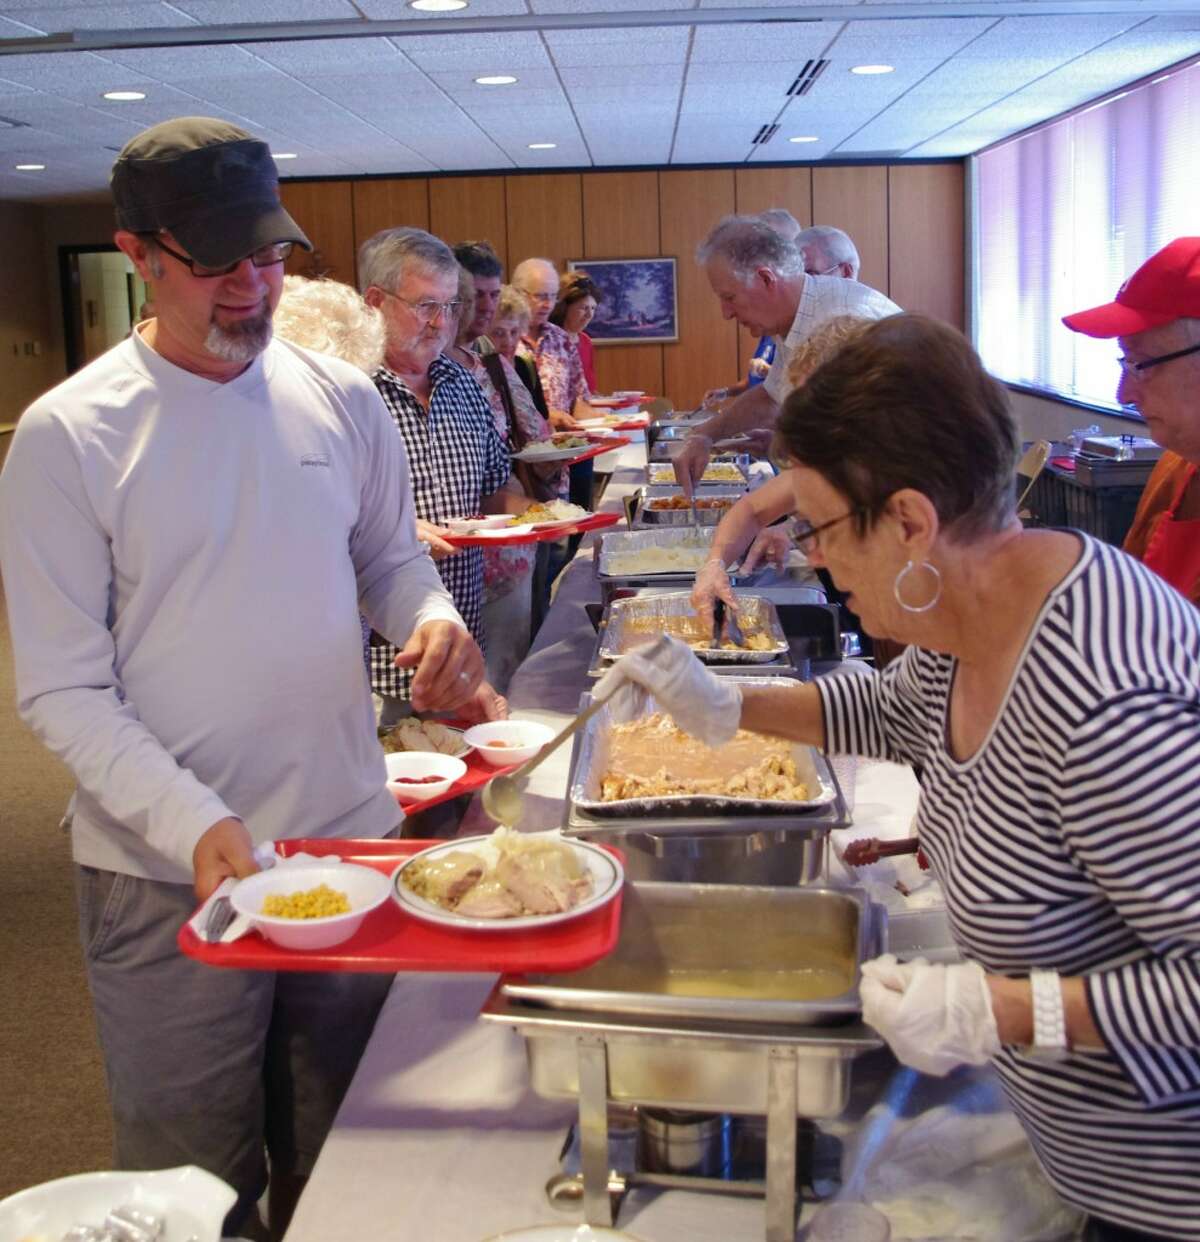 Keep the gravy coming, just like on Thanksgiving, Richard Morehouse said. Thanksgiving in July dinner was held Thursday at St. Joseph's Parish Center as a fundraiser for the Matthew 25:35 Food Pantry. (Dave Yarnell/News Advocate)